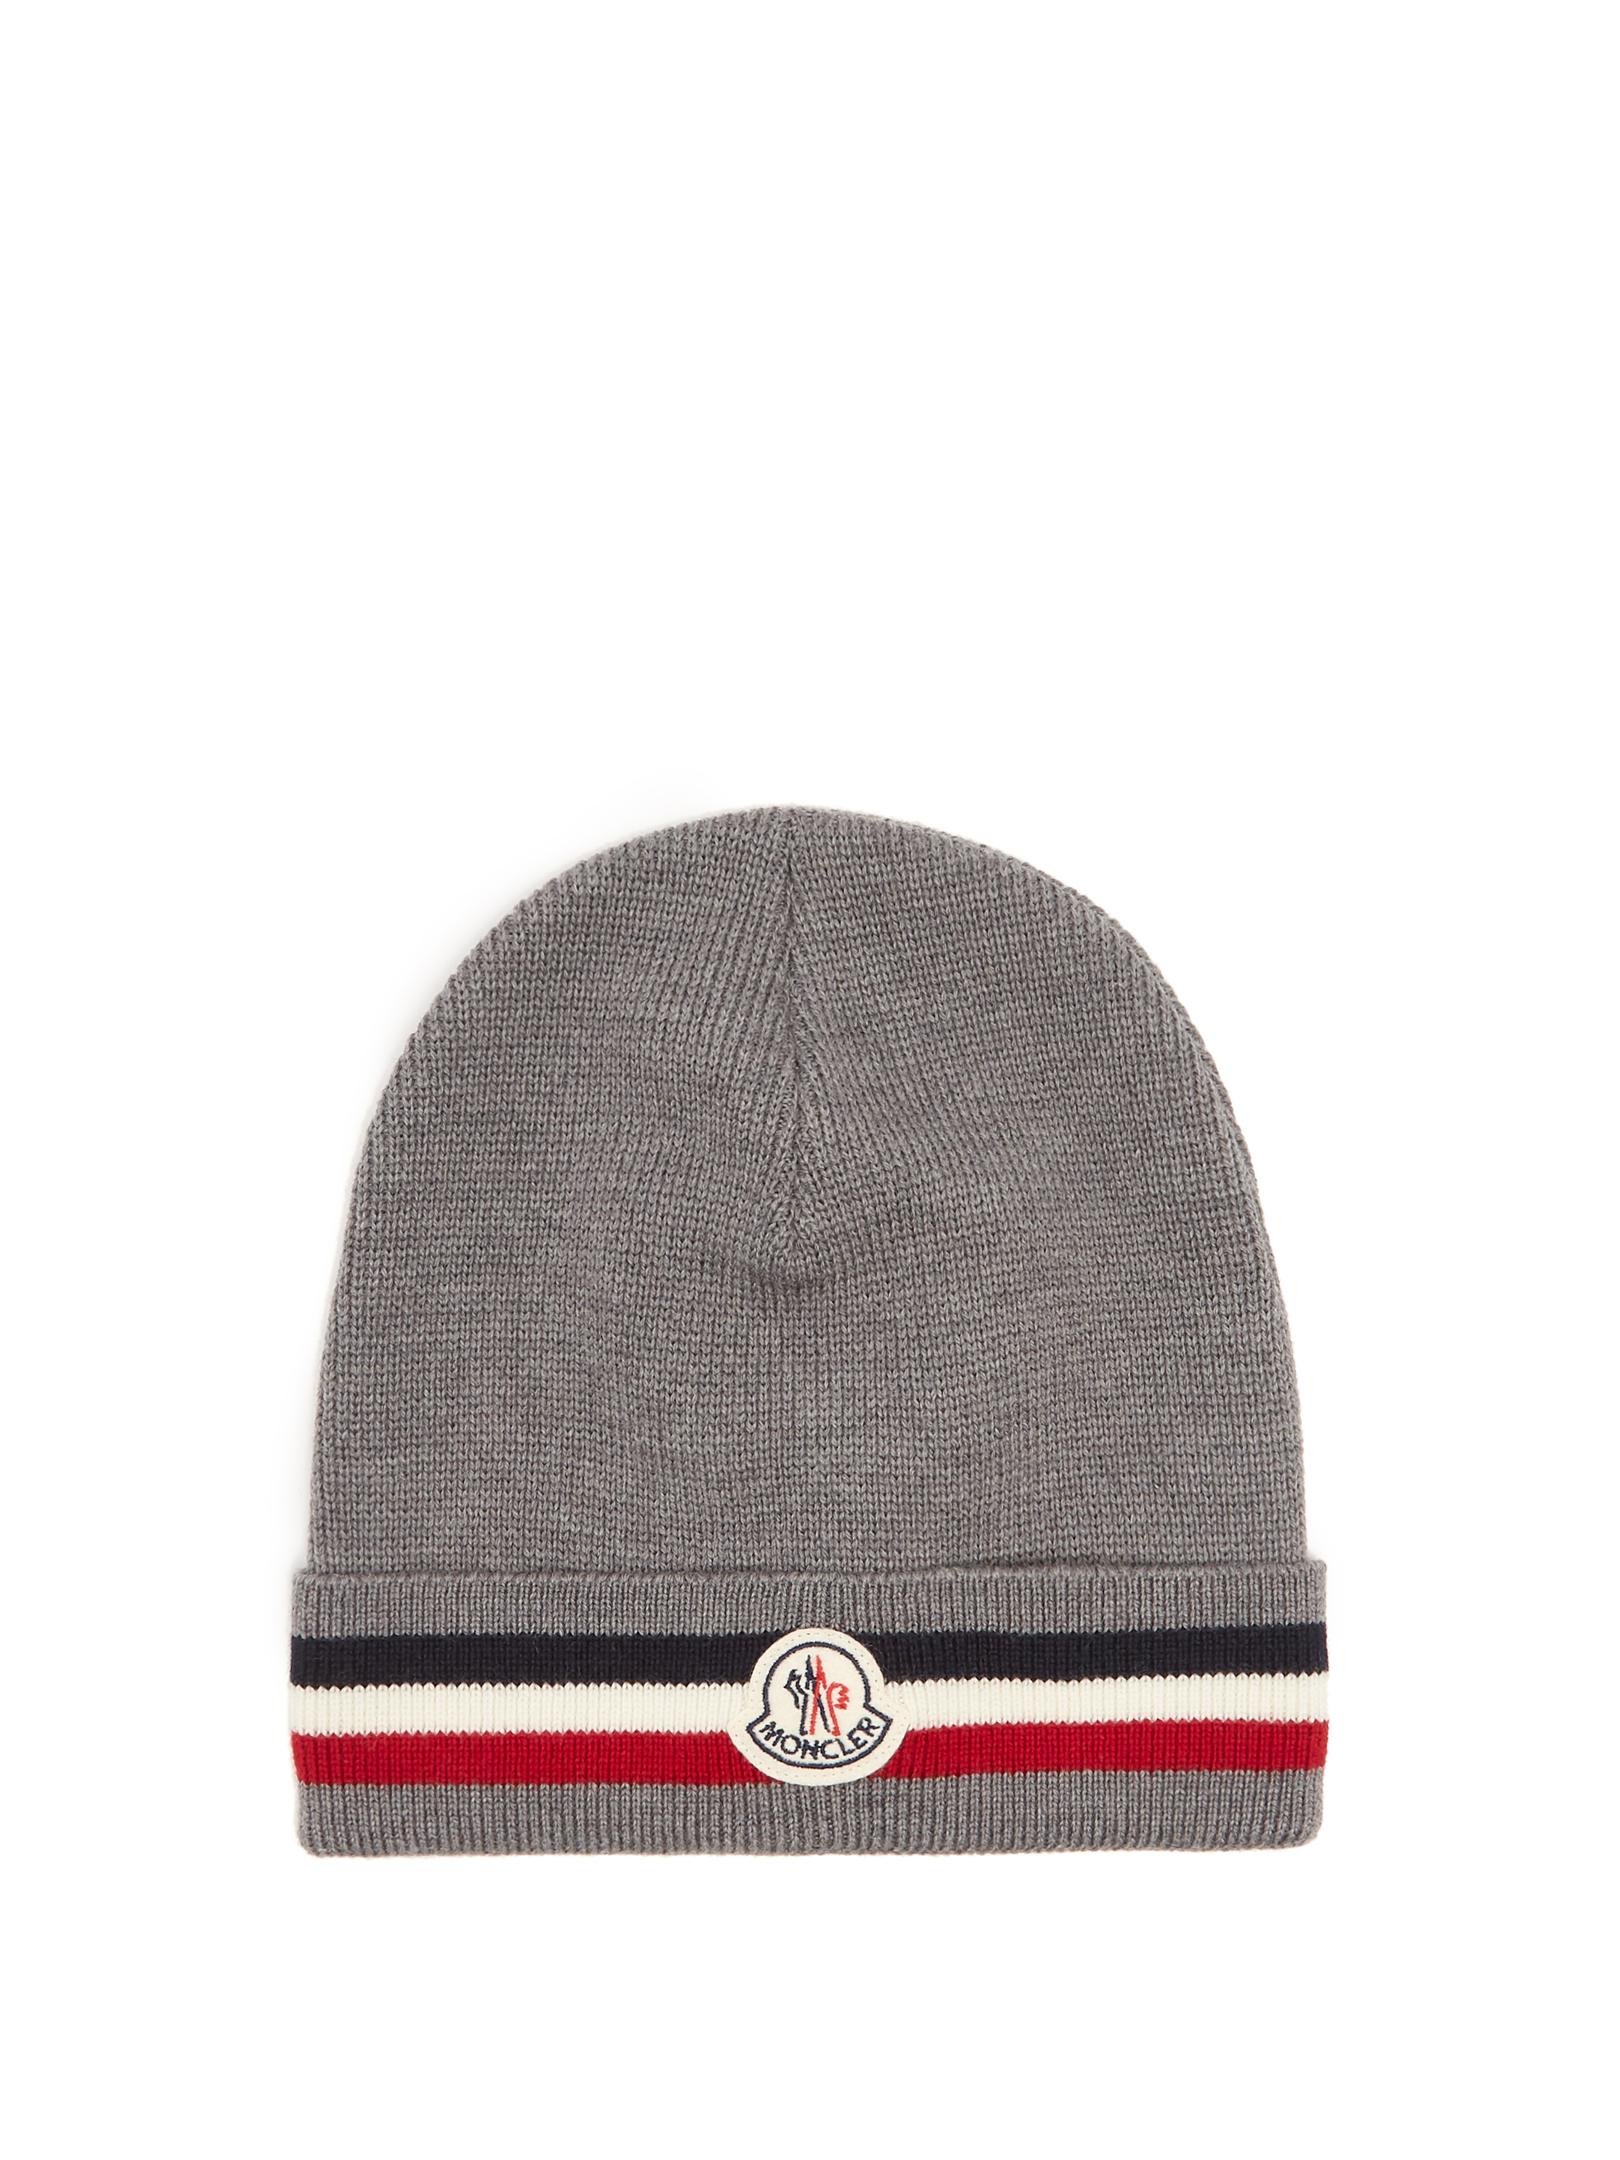 Moncler Striped Wool Beanie Hat in Grey 